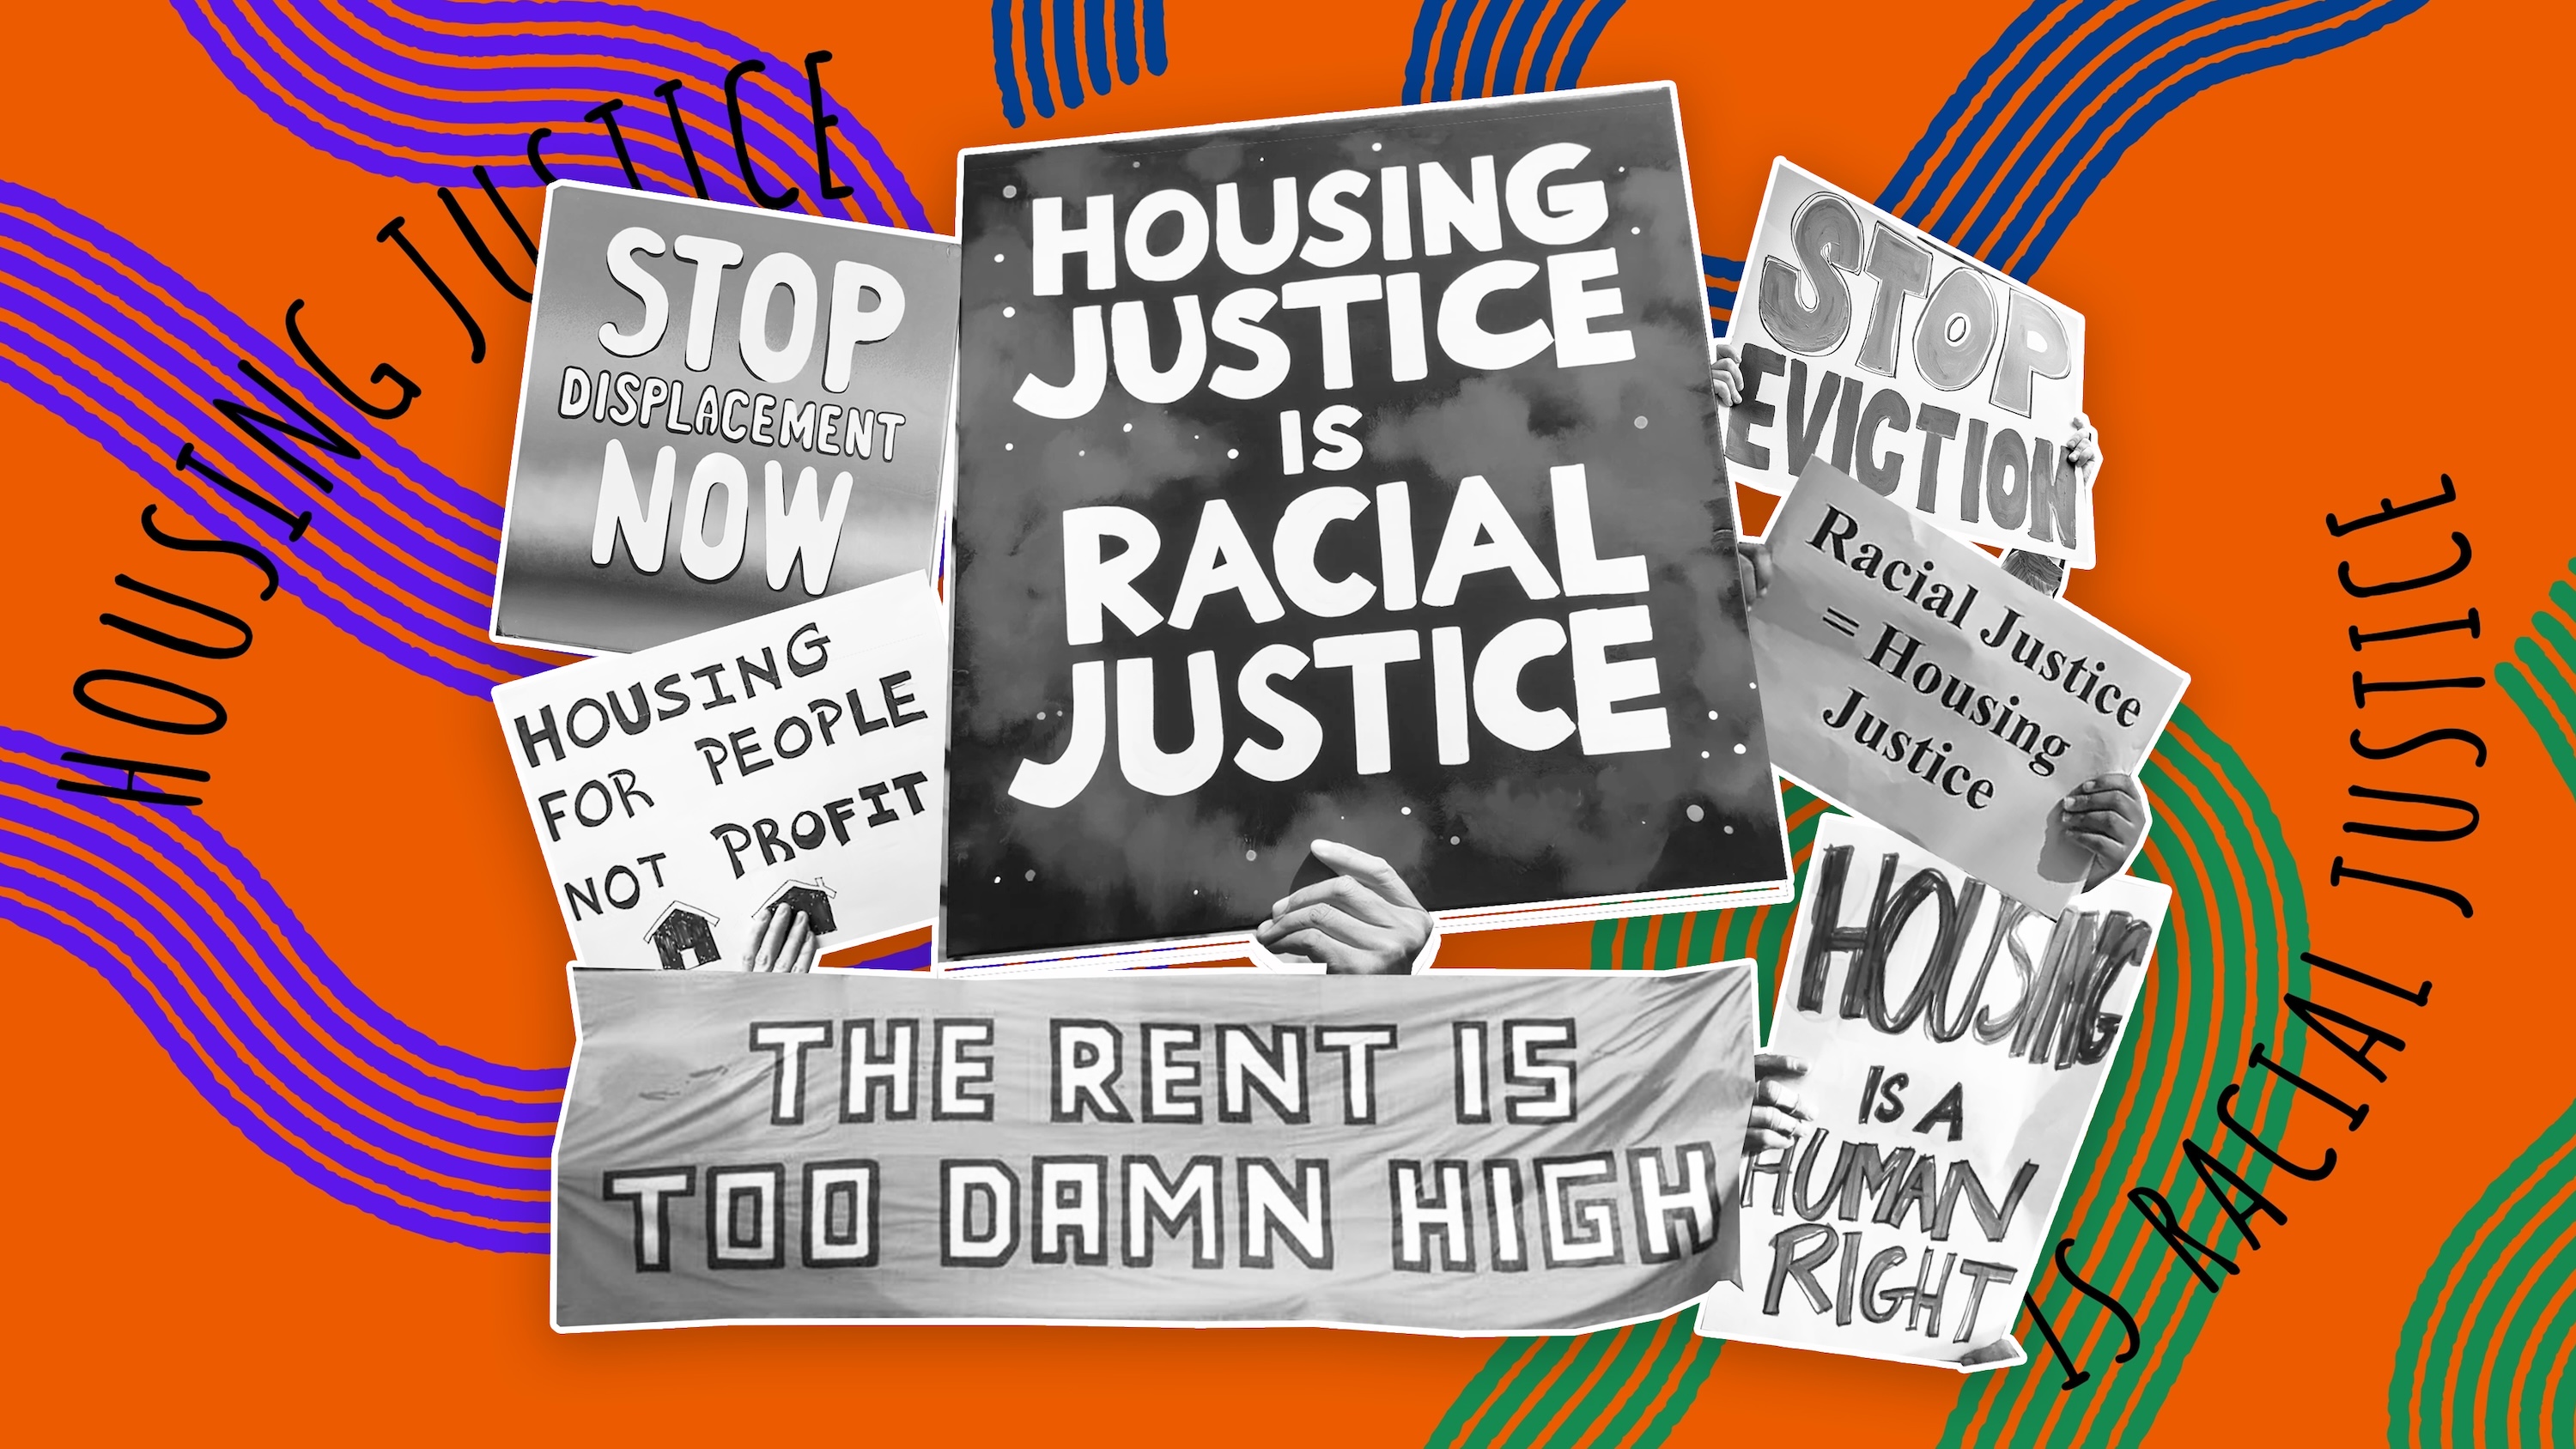 Graphic of protest signs in support of housing justice